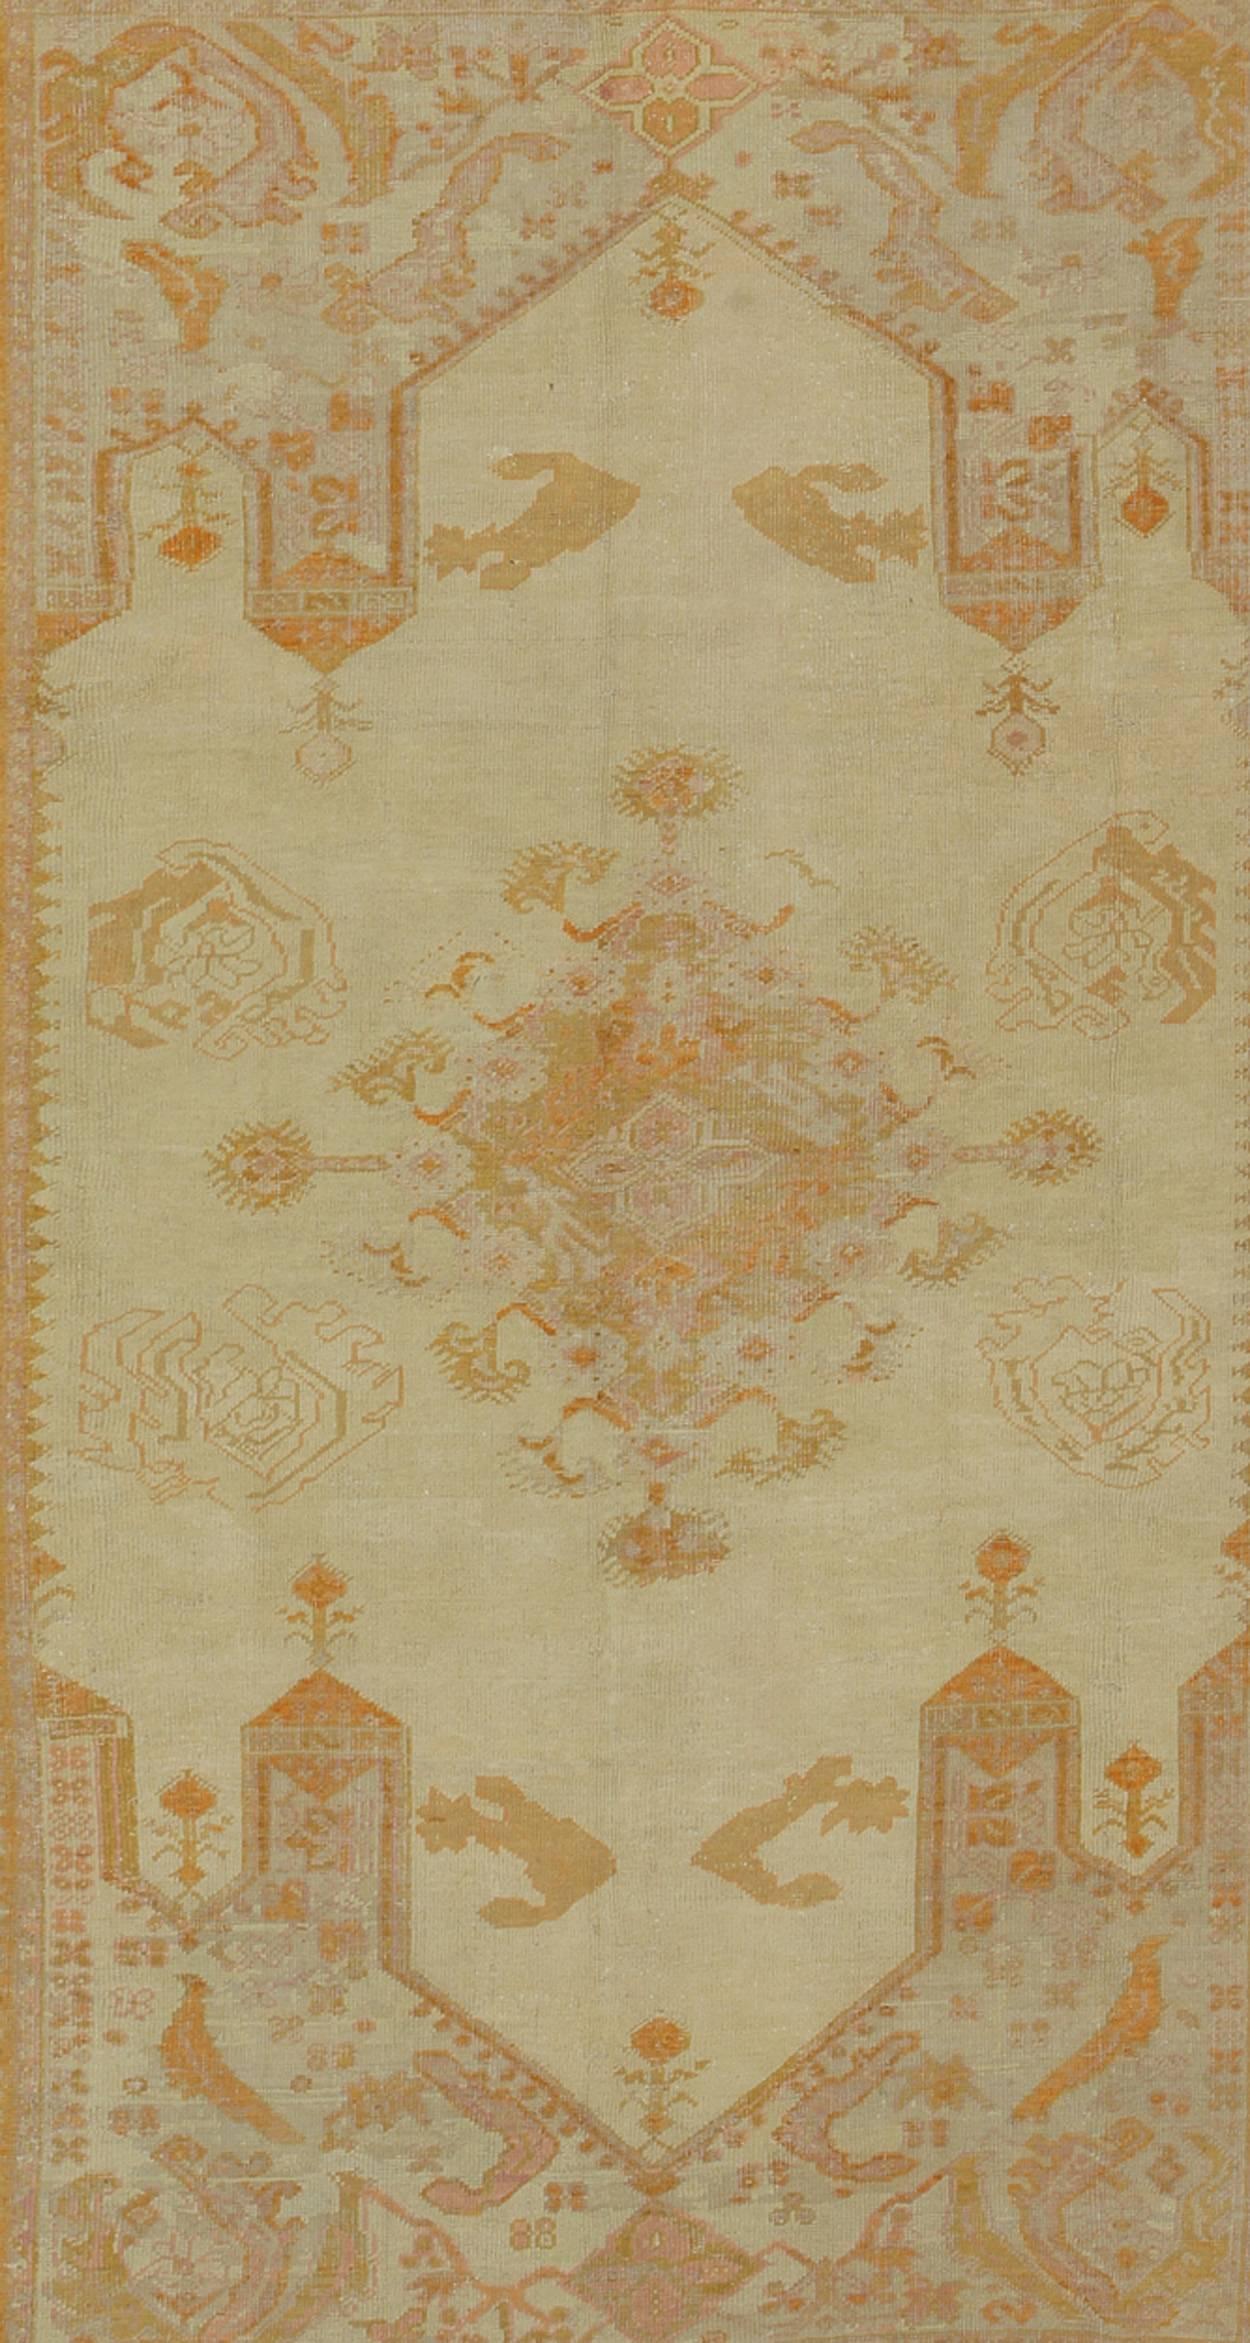 Hand-Knotted Antique Turkish Oushak Rug with Geometric in Cream, Lavender, Green and Orange